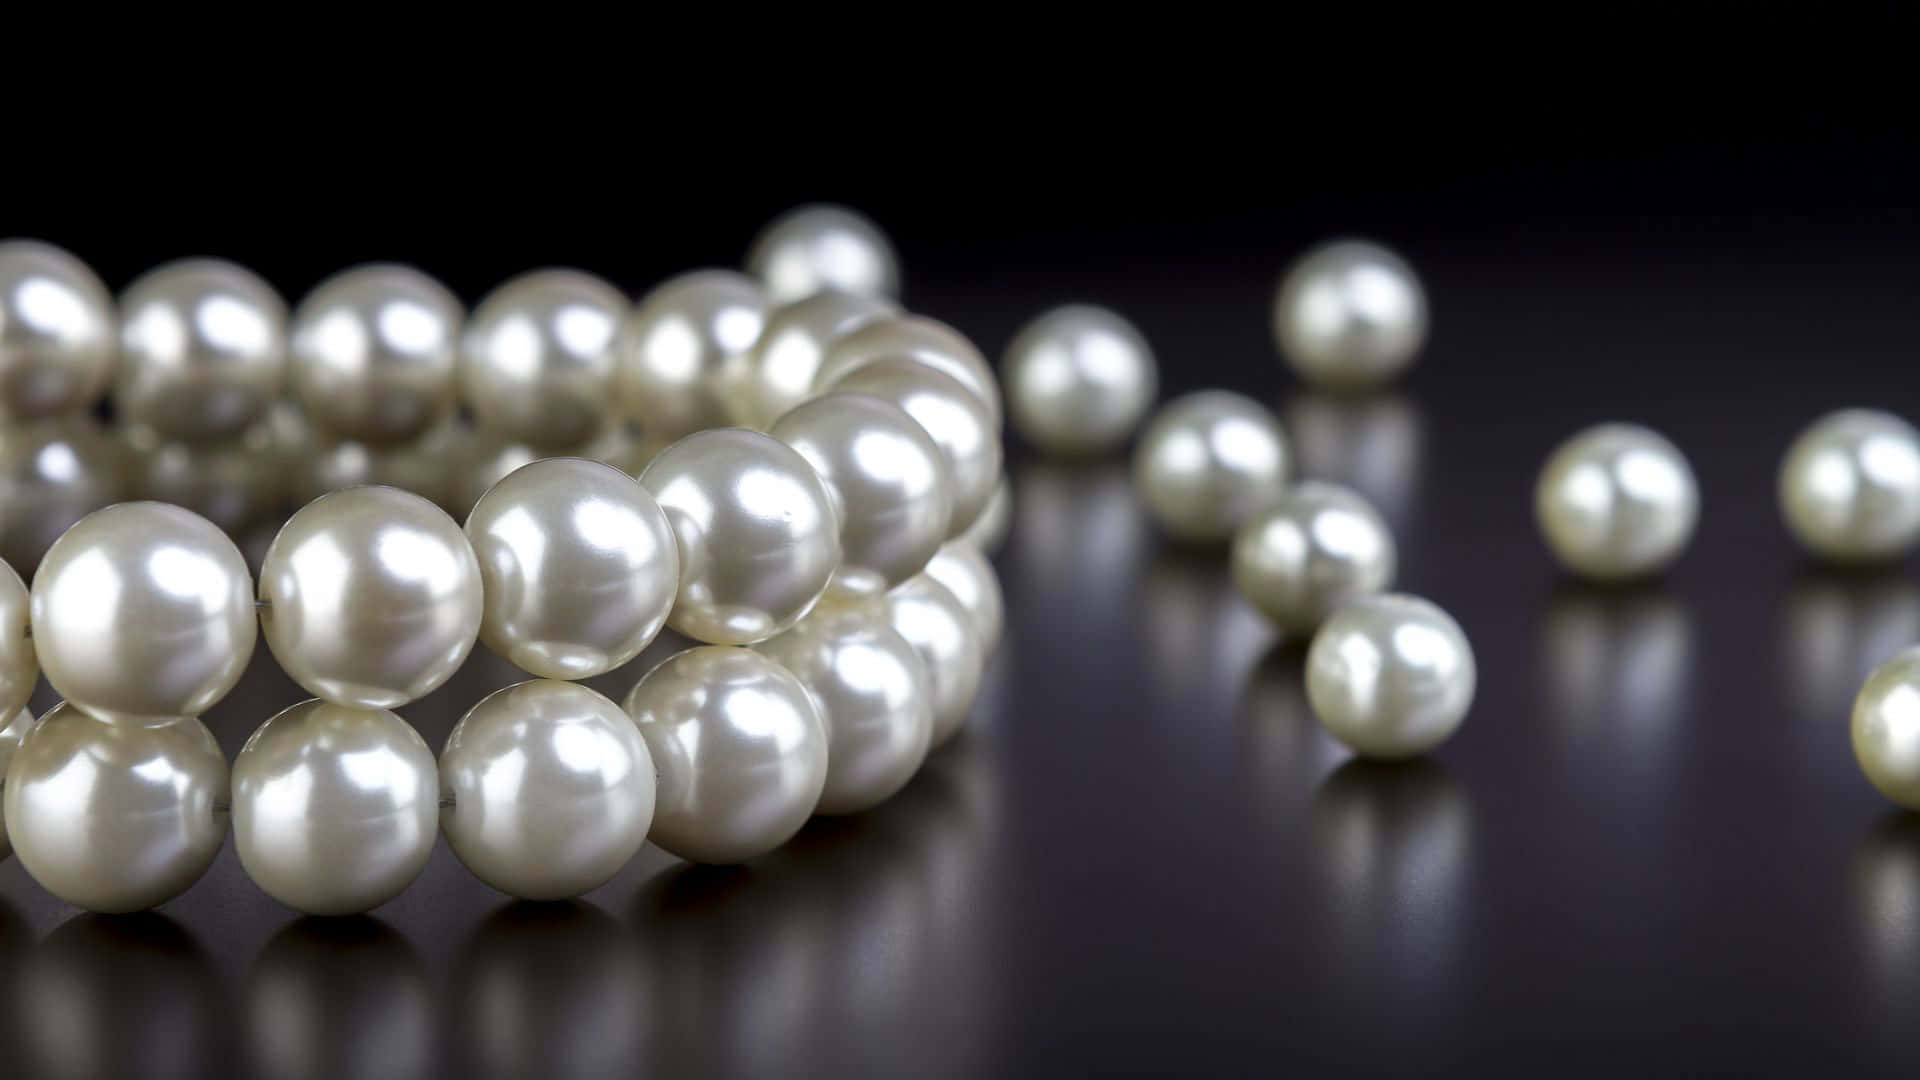 An illustration of an intricately white pearl